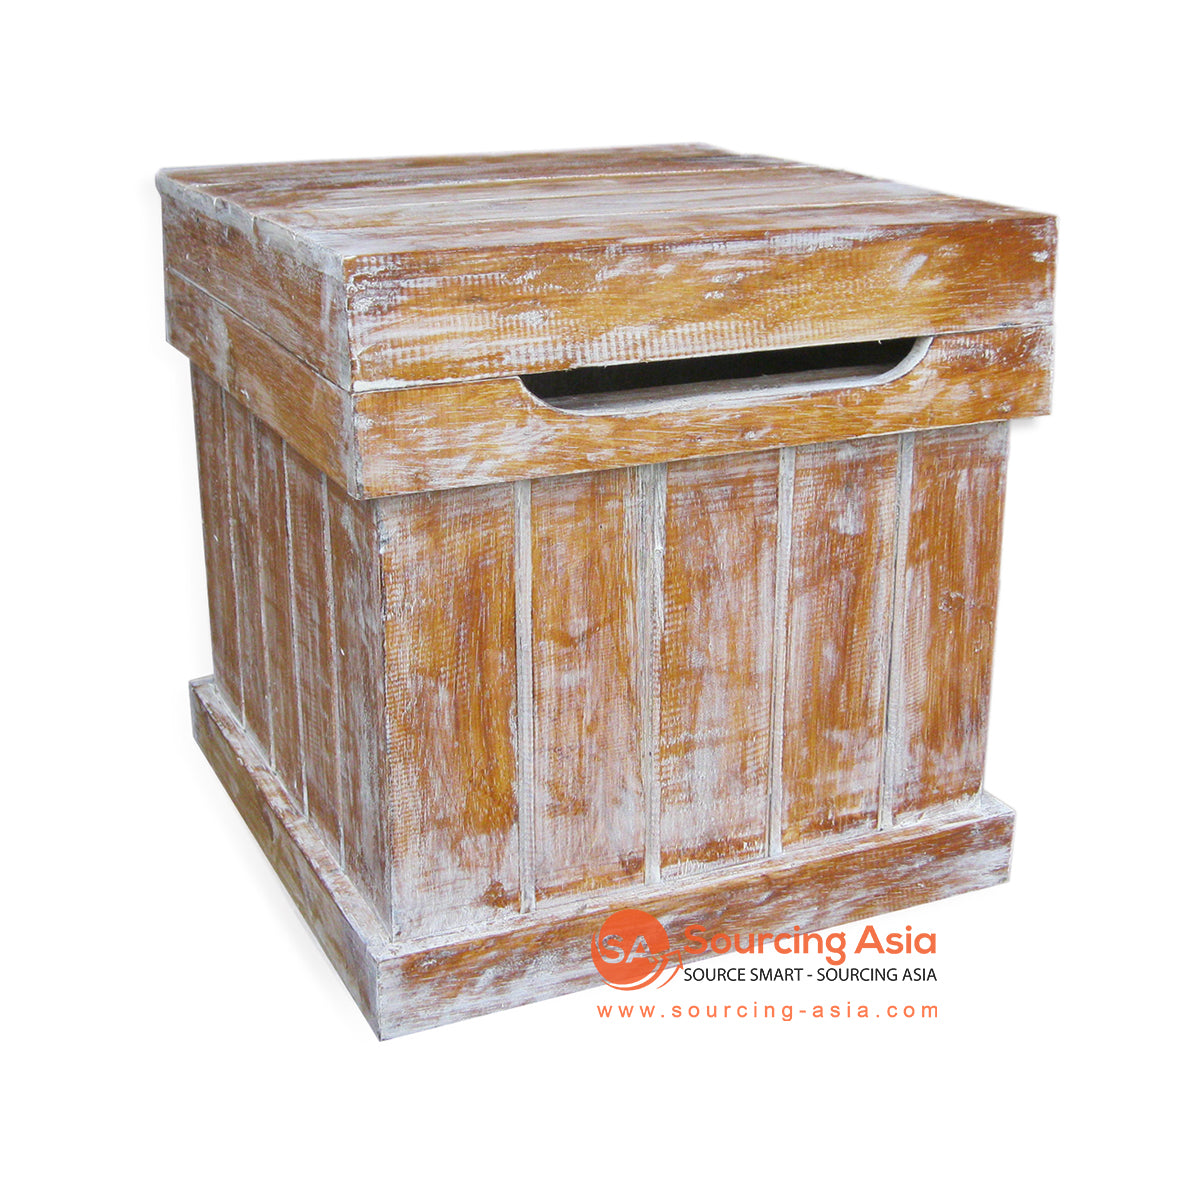 THE076-1 BROWN WASH WOODEN LAUNDRY BOX